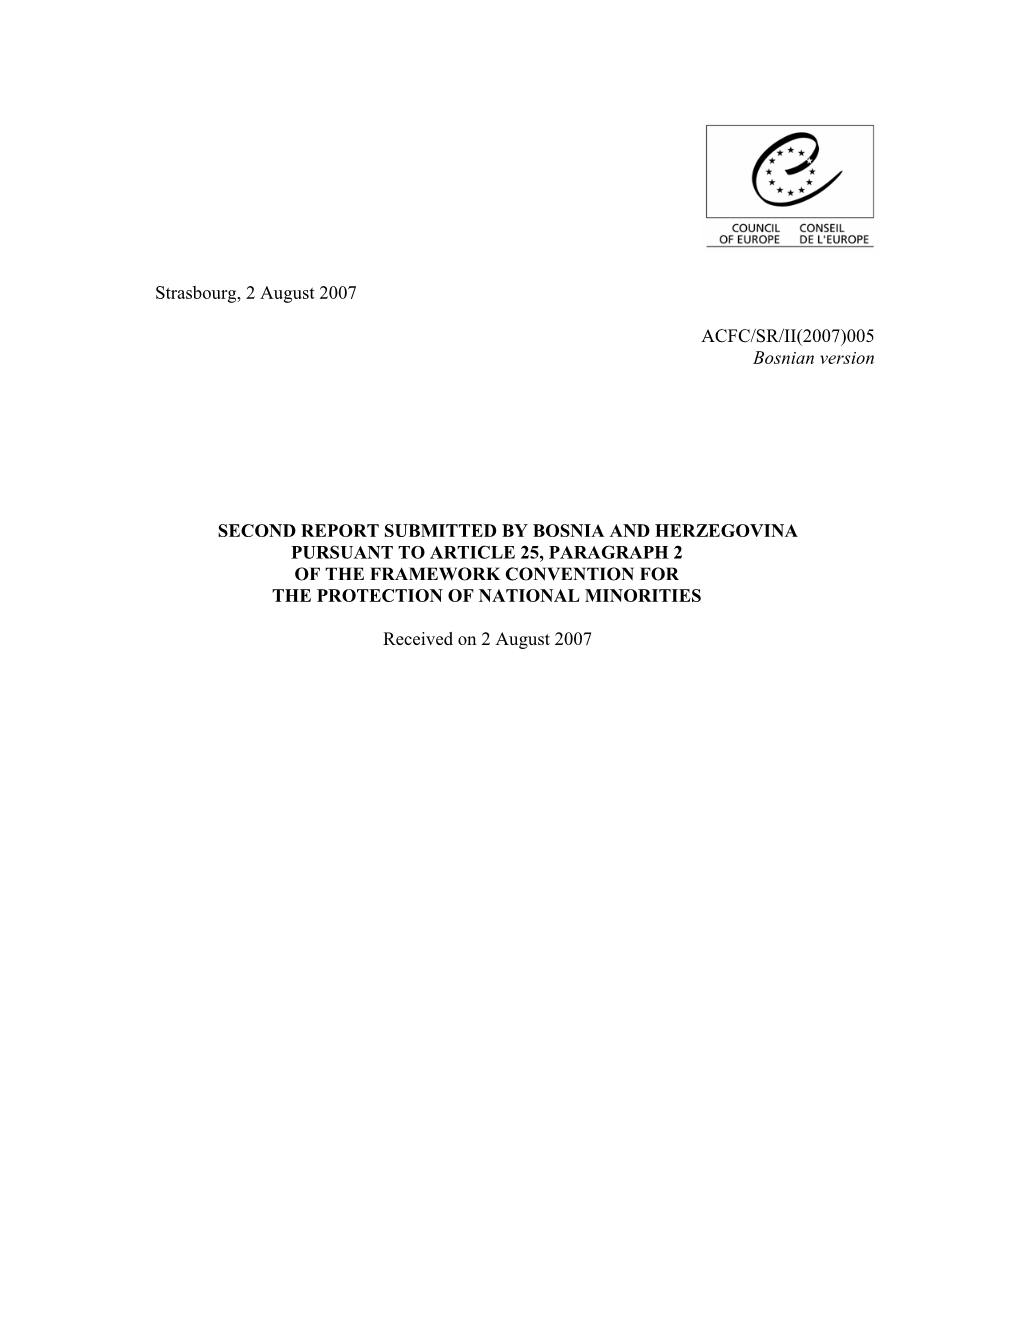 005 Bosnian Version SECOND REPORT SUBMITTED